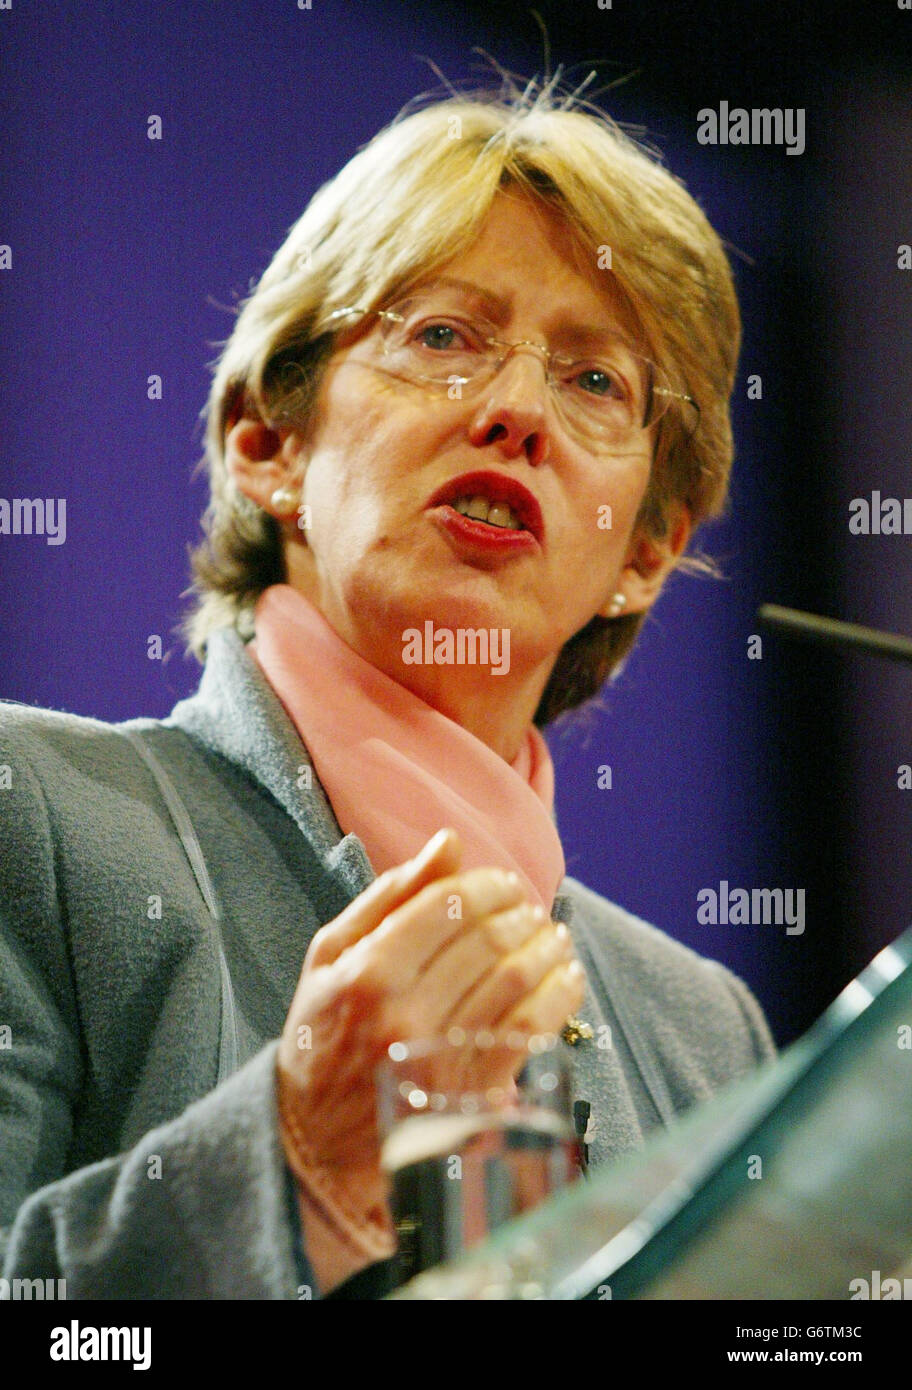 Trade Secretary Patricia Hewitt makes her speech on the final day of the Labour Spring conference at the Manchester International Convention Centre. Patricia Hewitt appealed at the conference for women's votes to boost Labour in local council and MEP elections in June. Stock Photo